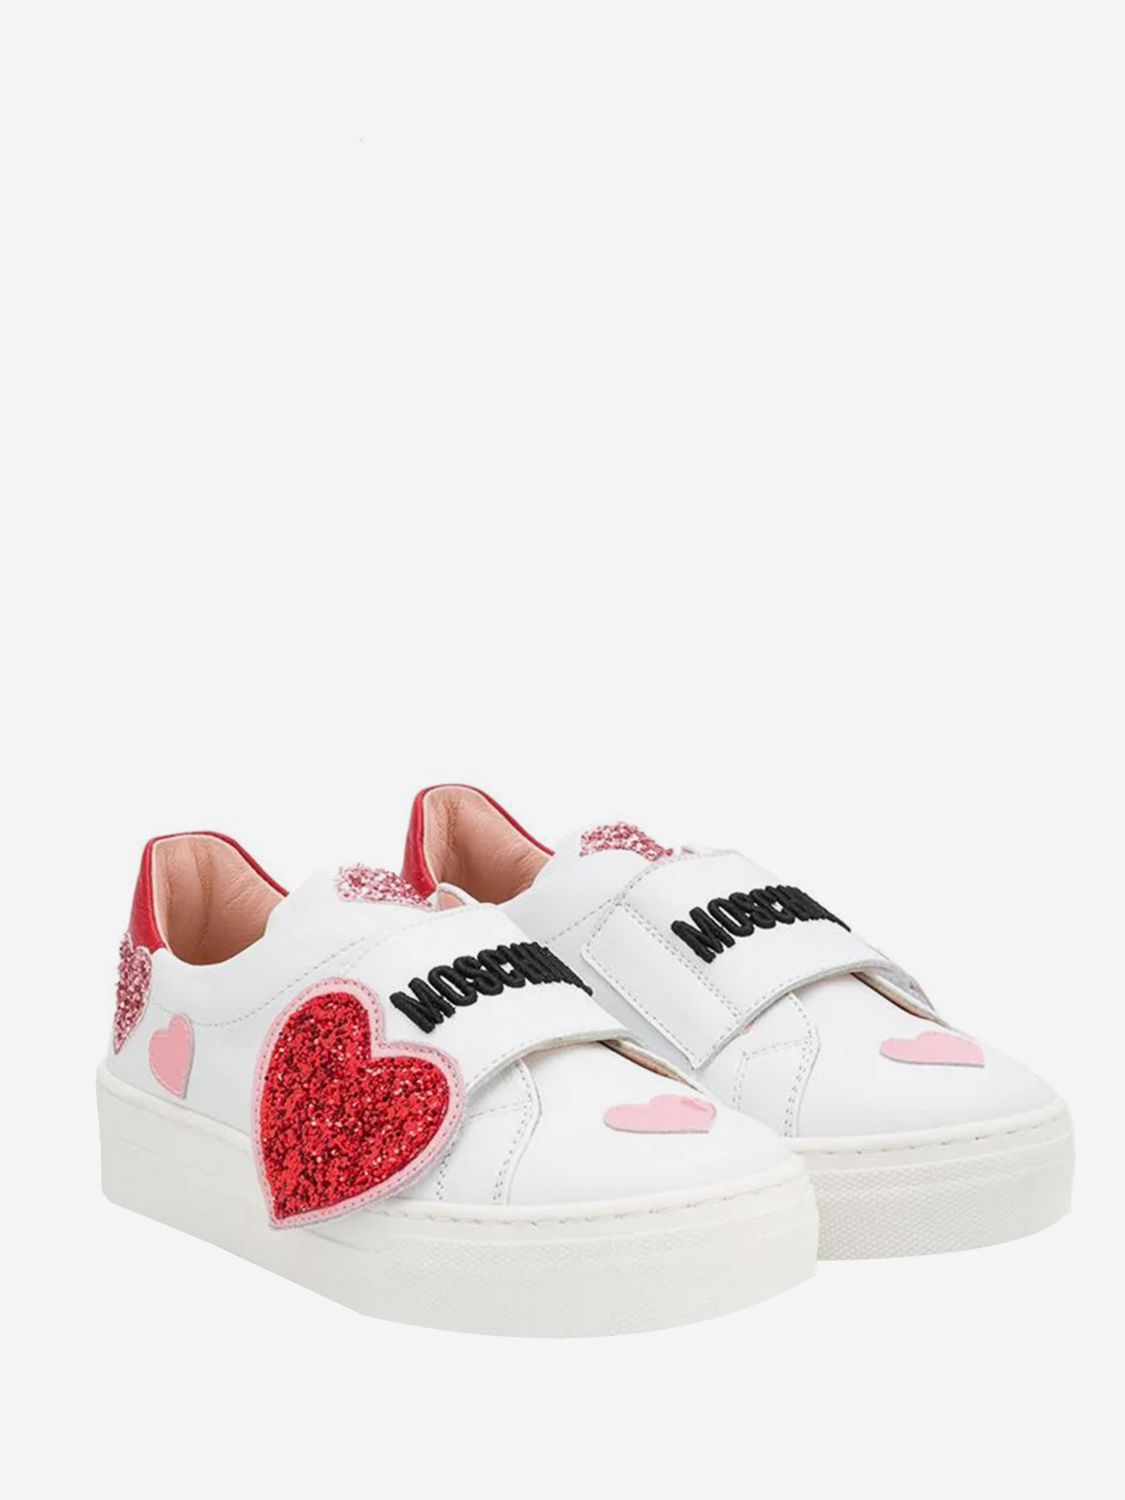 Moschino Teen Outlet: sneakers in leather with glitter heart | Shoes ...